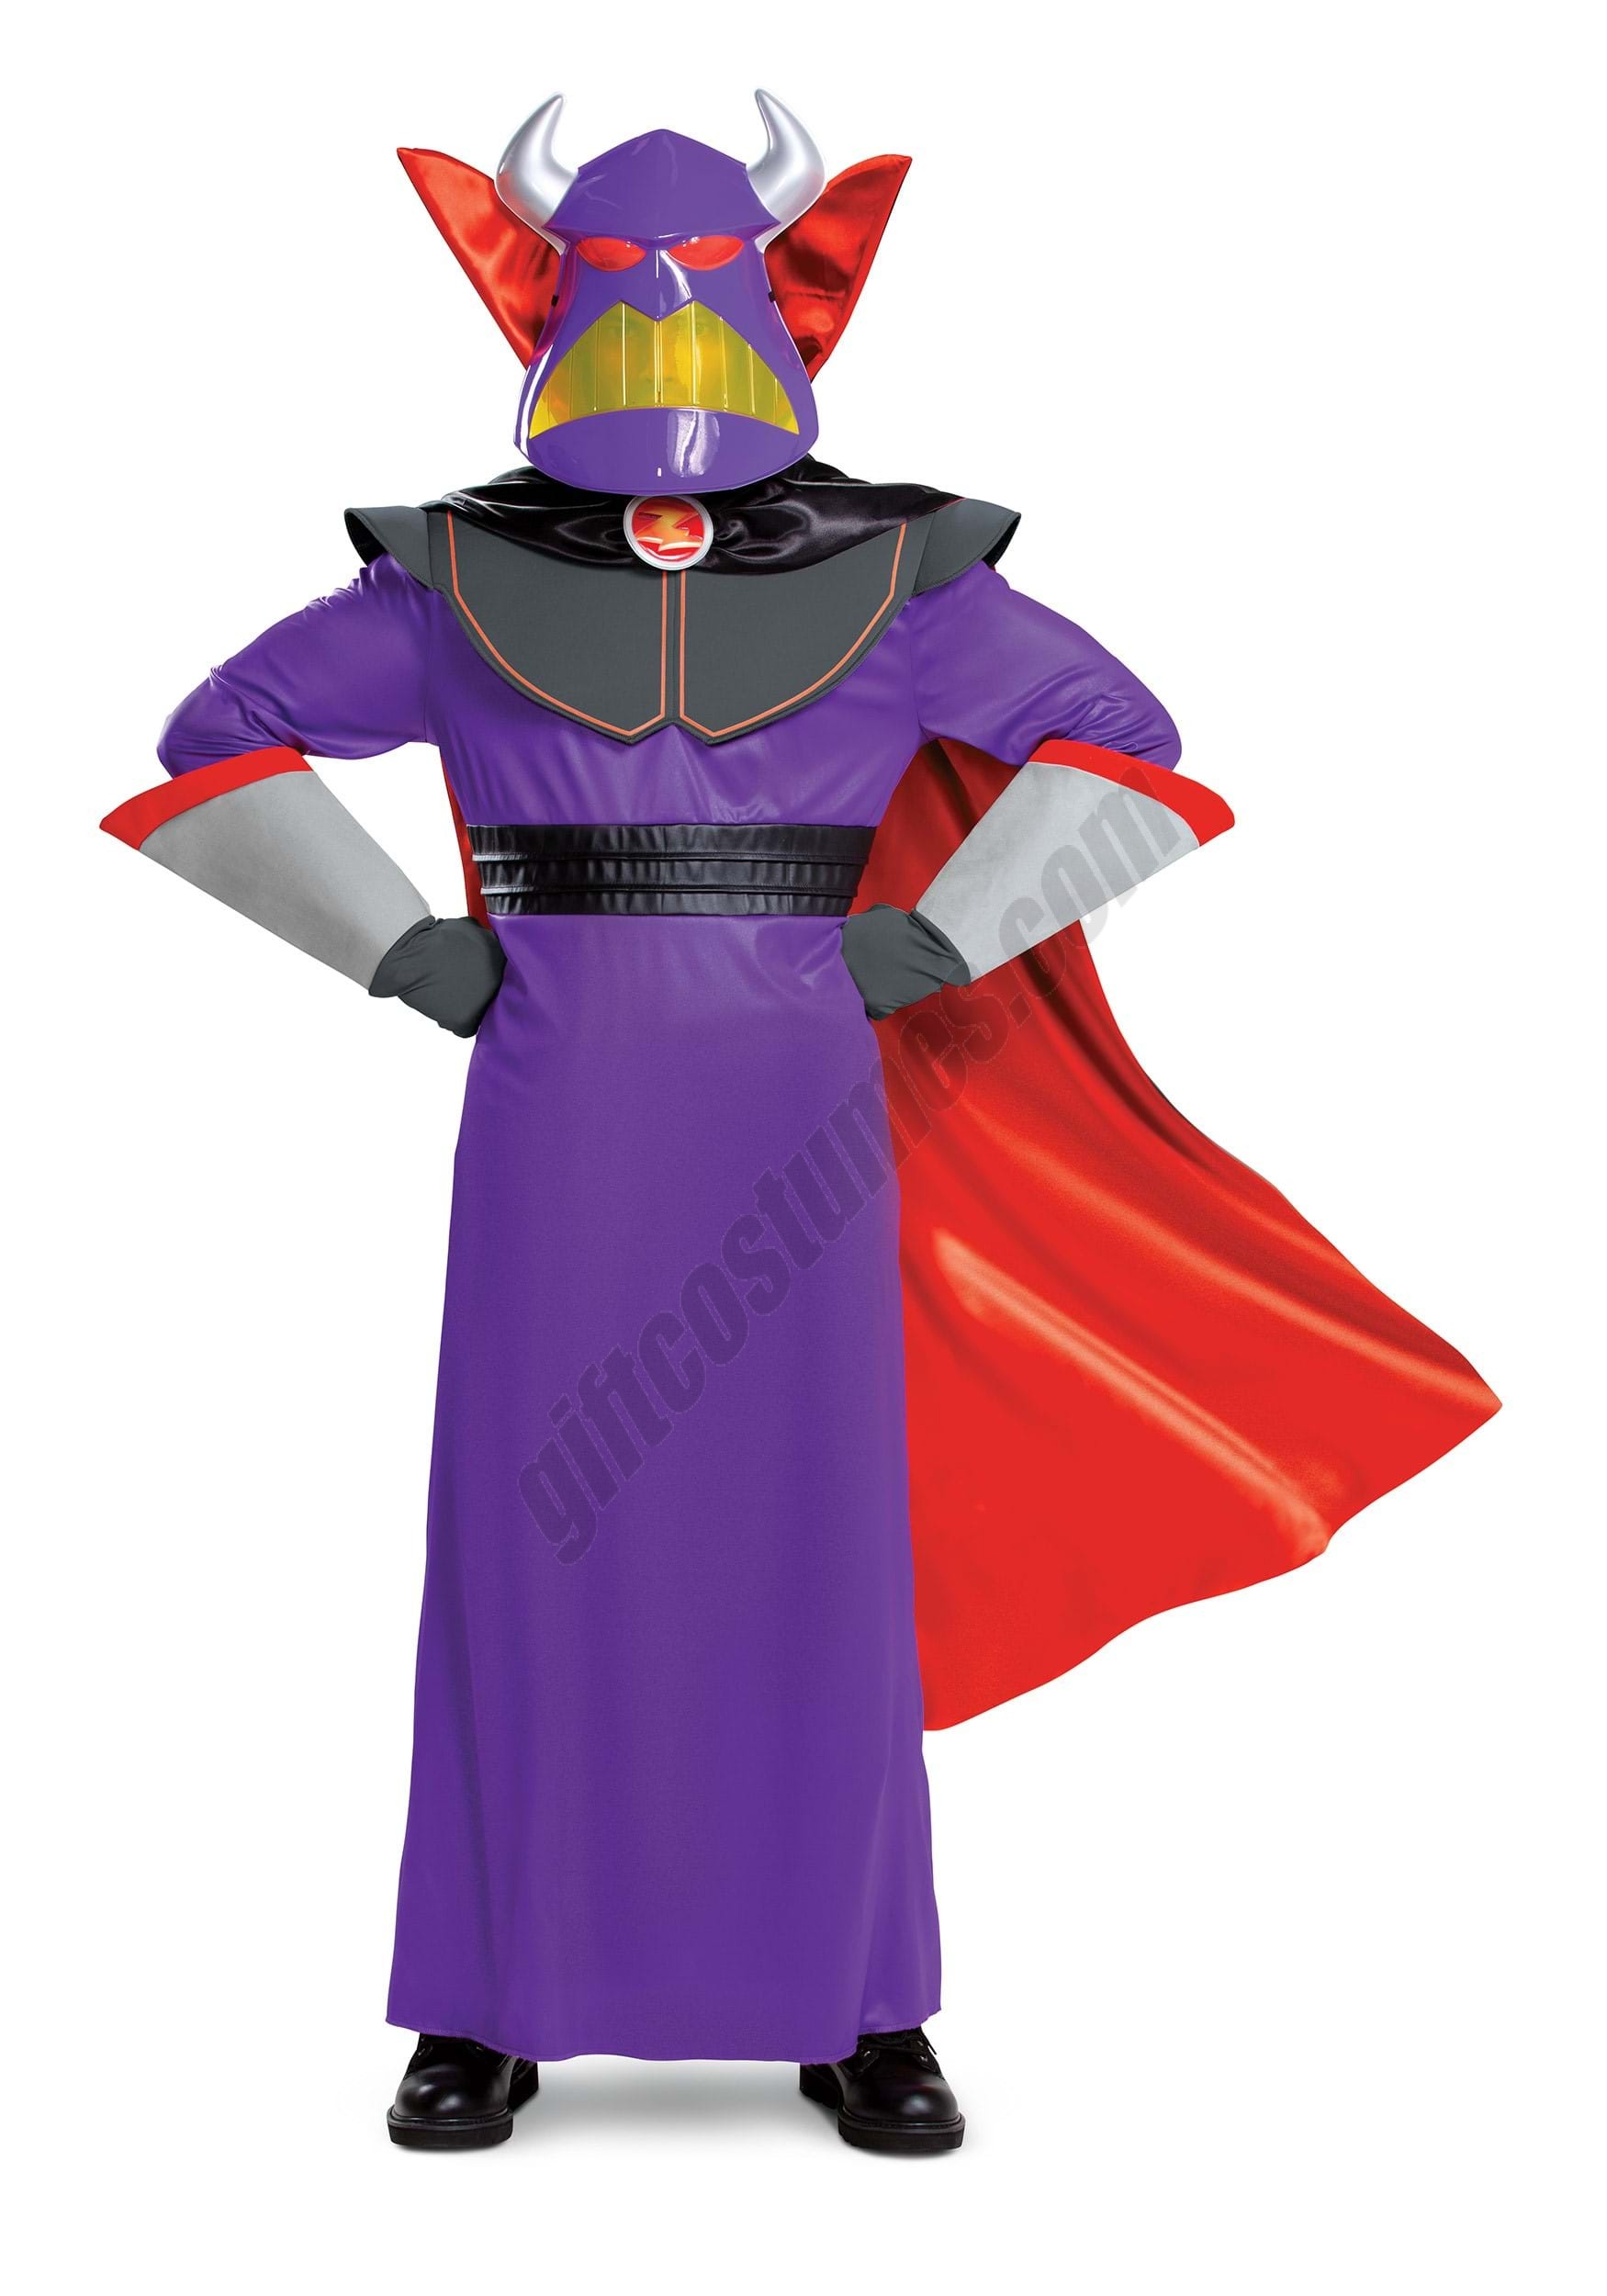 Toy Story Adult Emperor Zurg Deluxe Costume Promotions - Toy Story Adult Emperor Zurg Deluxe Costume Promotions